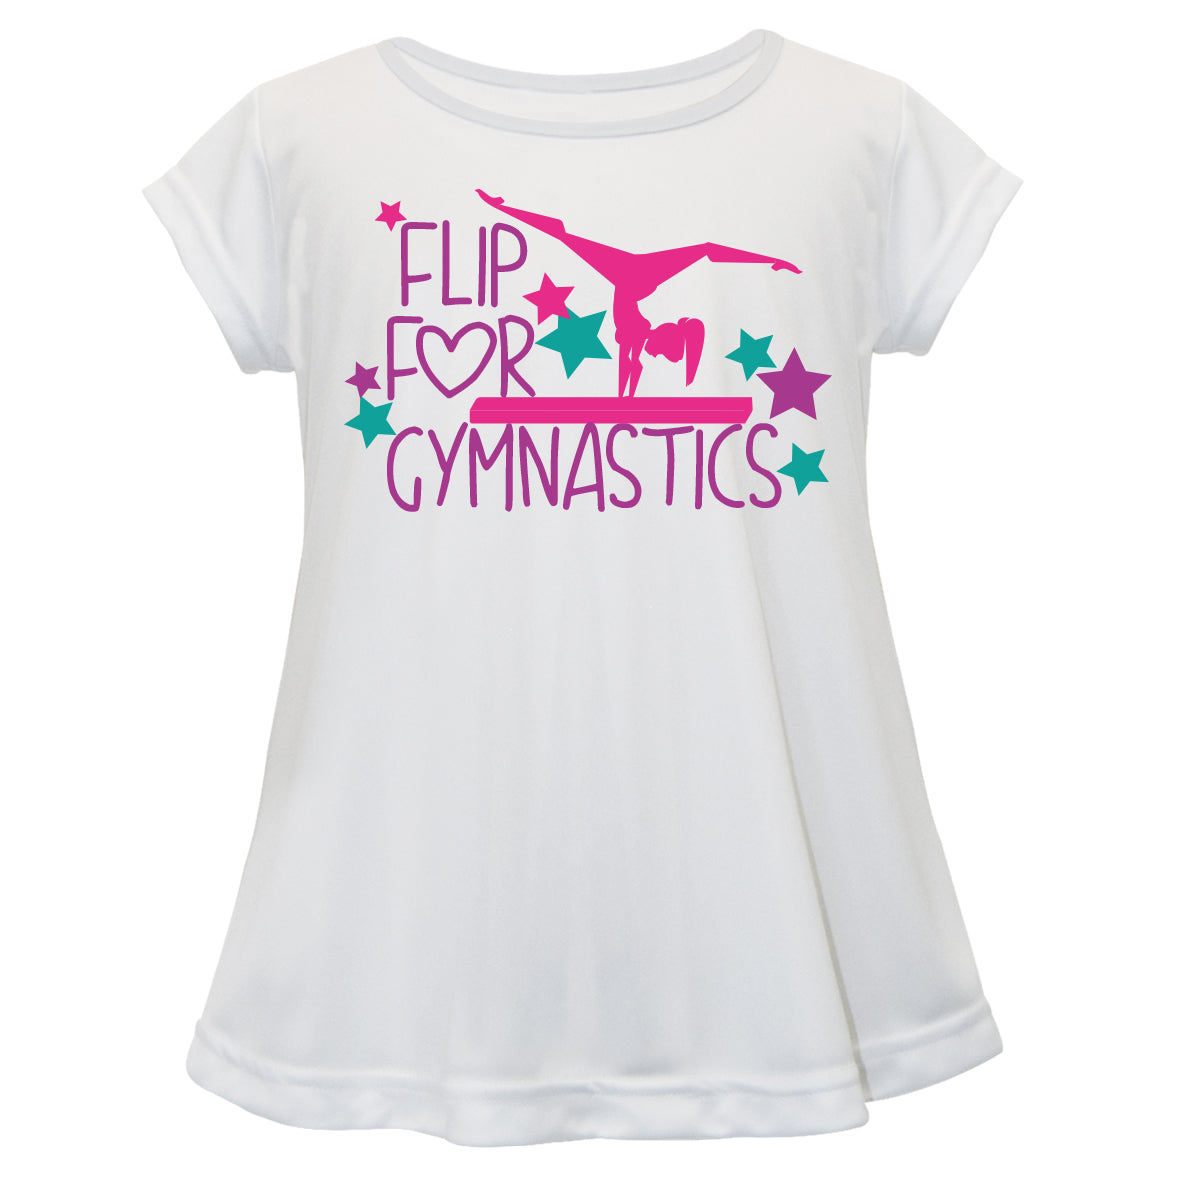 Flip For Gymnastics White Laurie Top - Wimziy&Co.